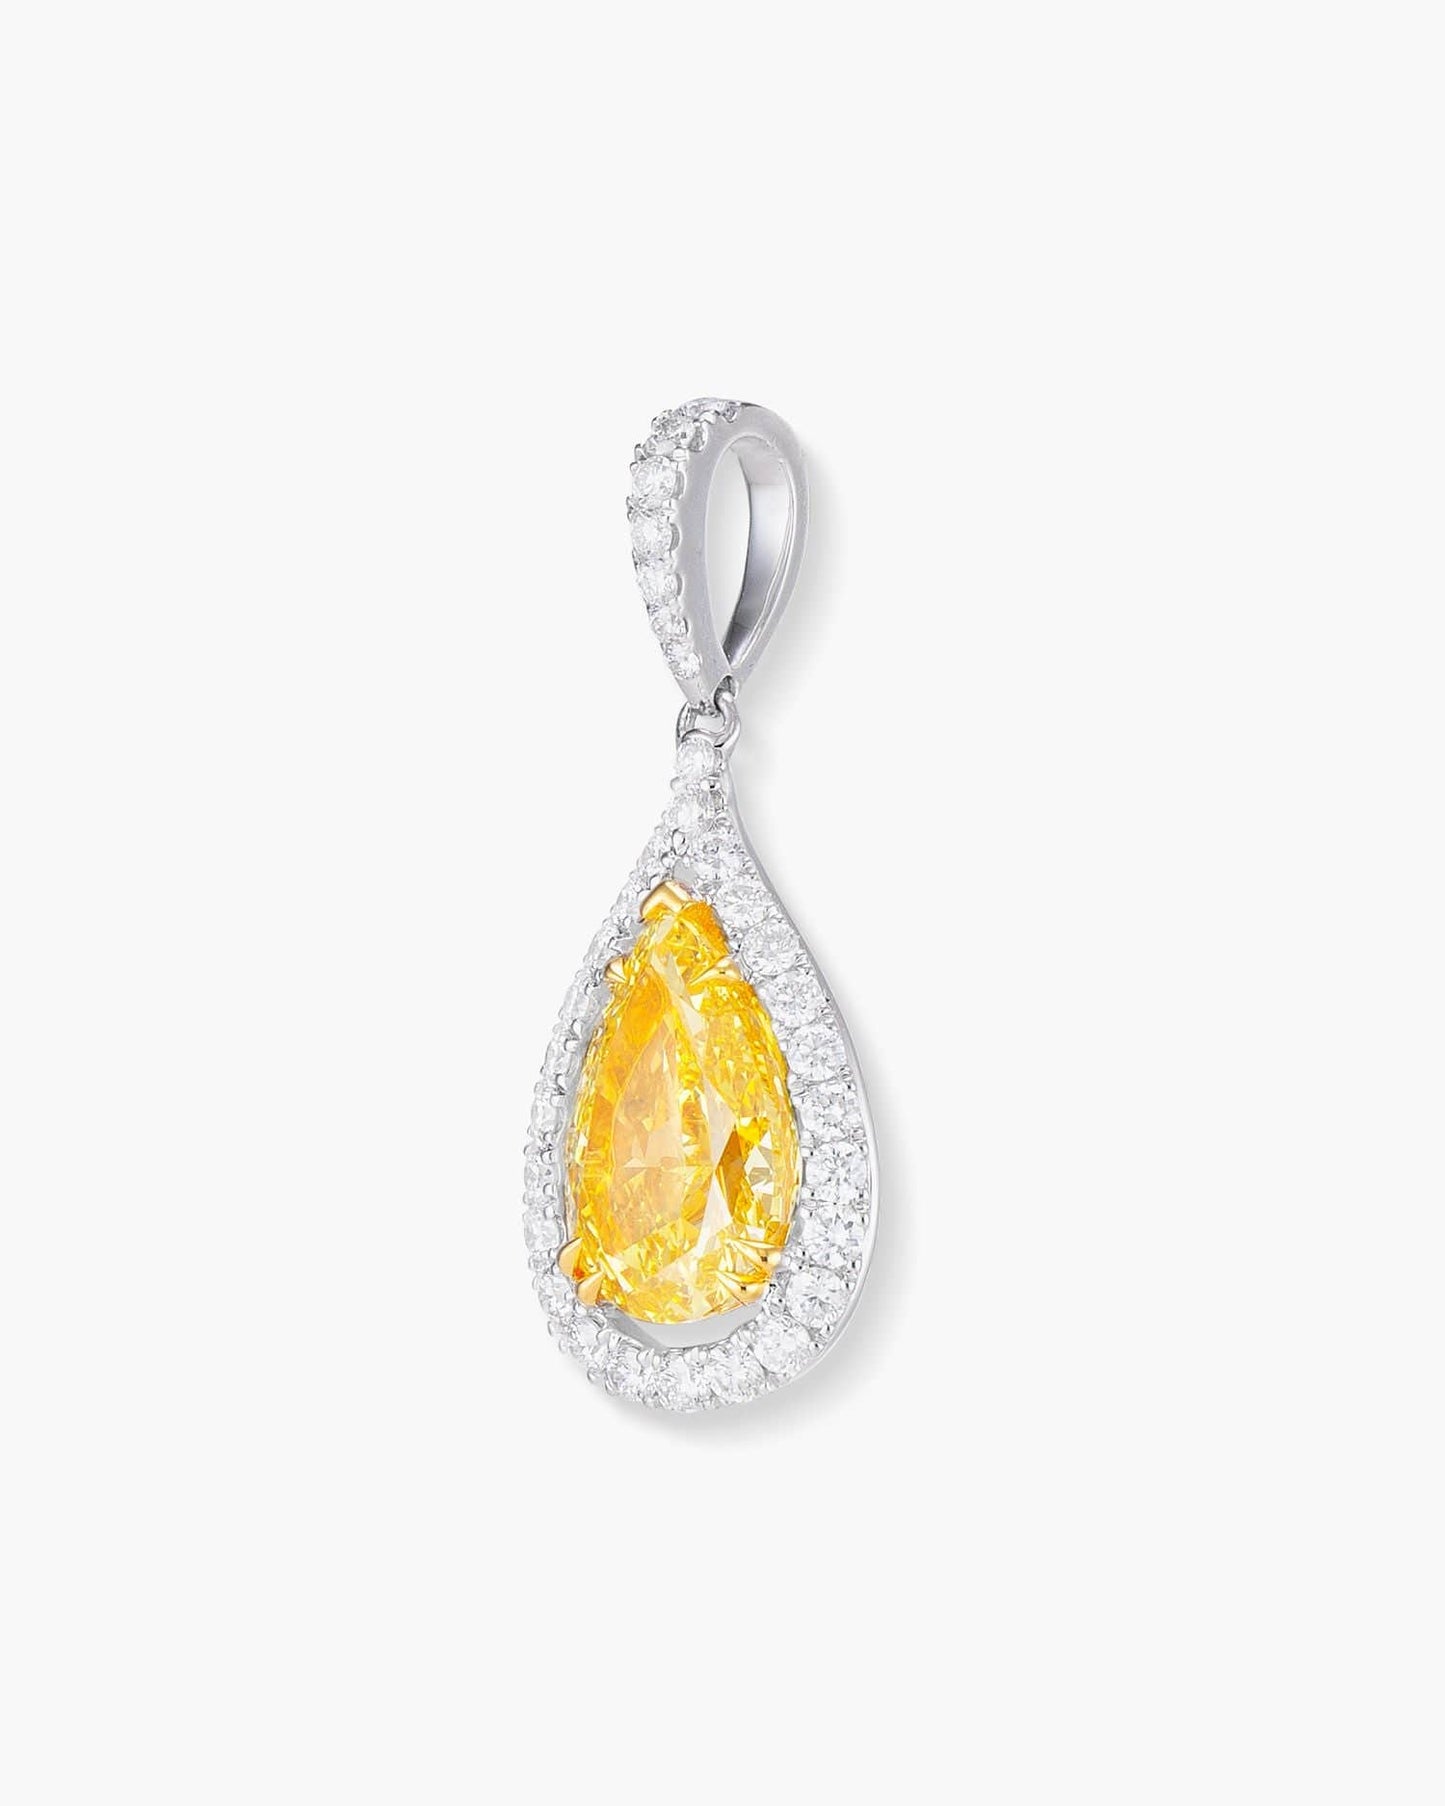 1.24 carat Pear Shape Yellow and White Diamond Pendant Necklace